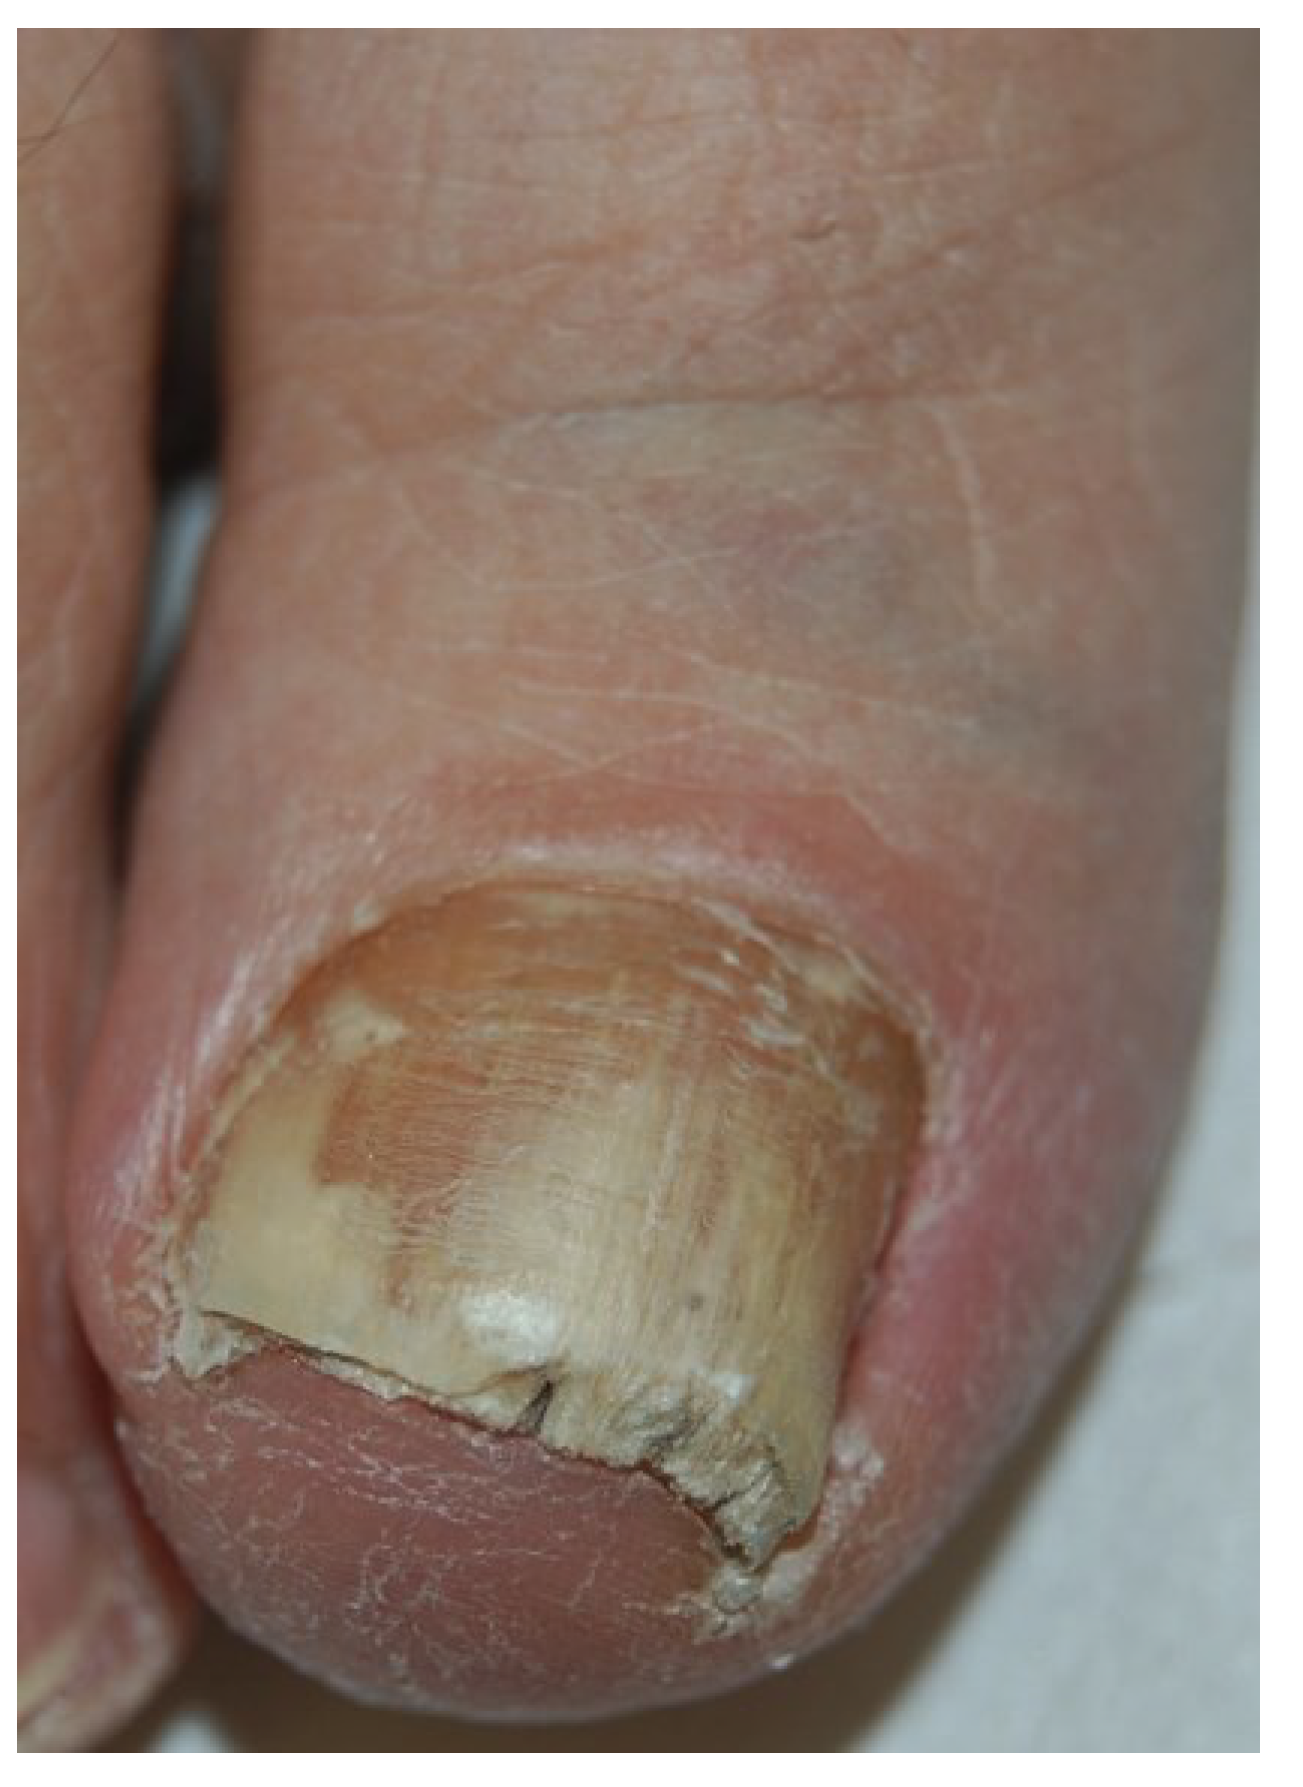 JoF | Free Full-Text | Onychomycosis: A Review